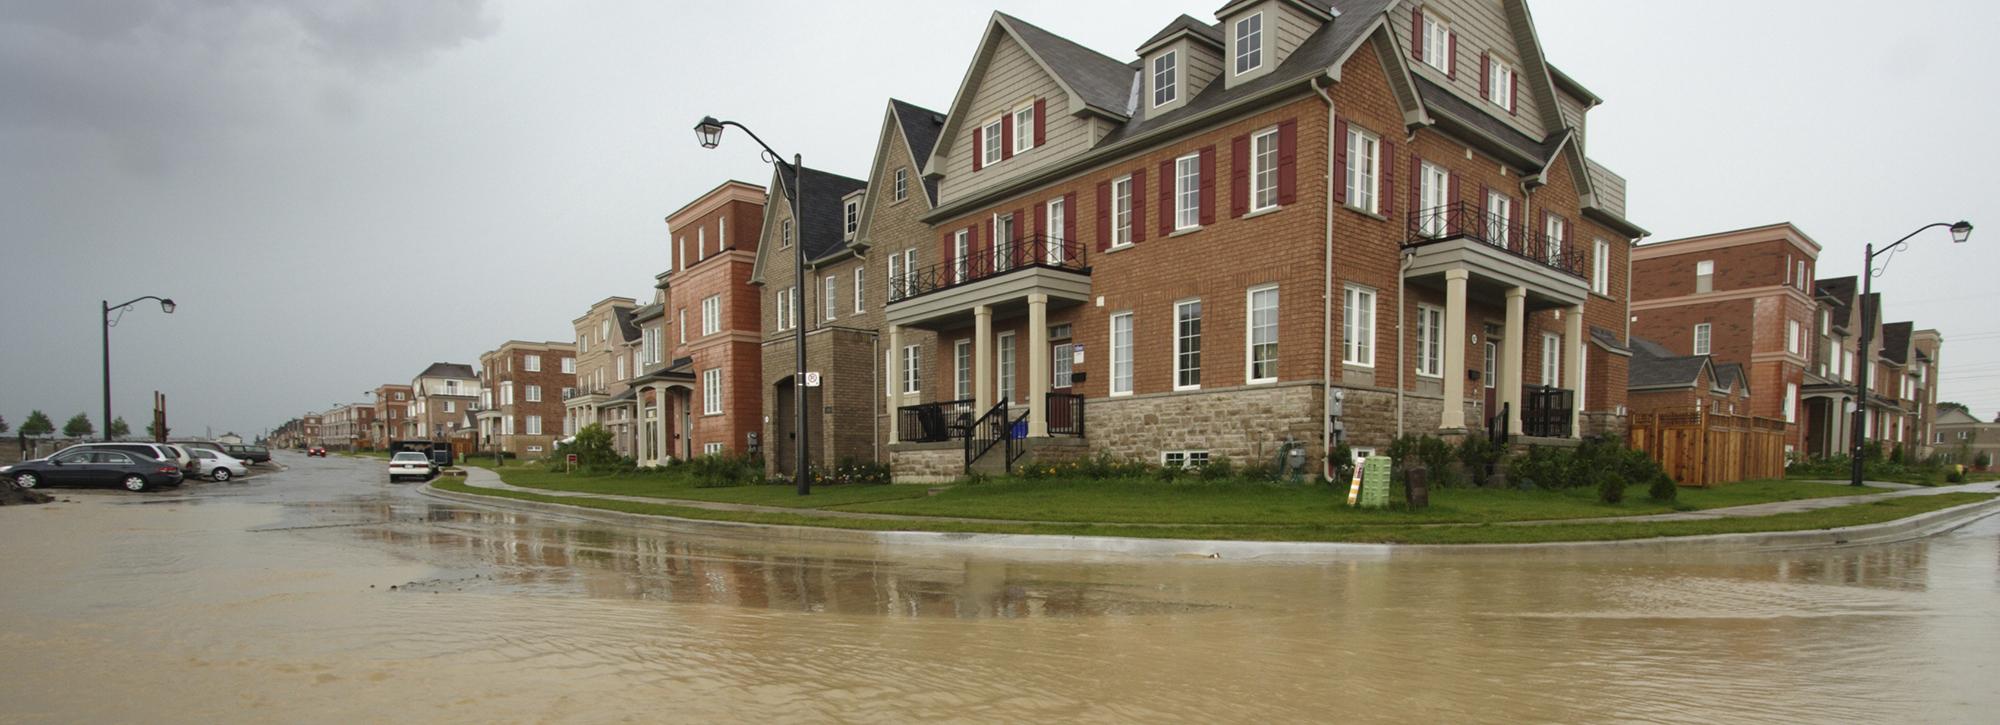 New houses development surrounded by brown water due to flooding